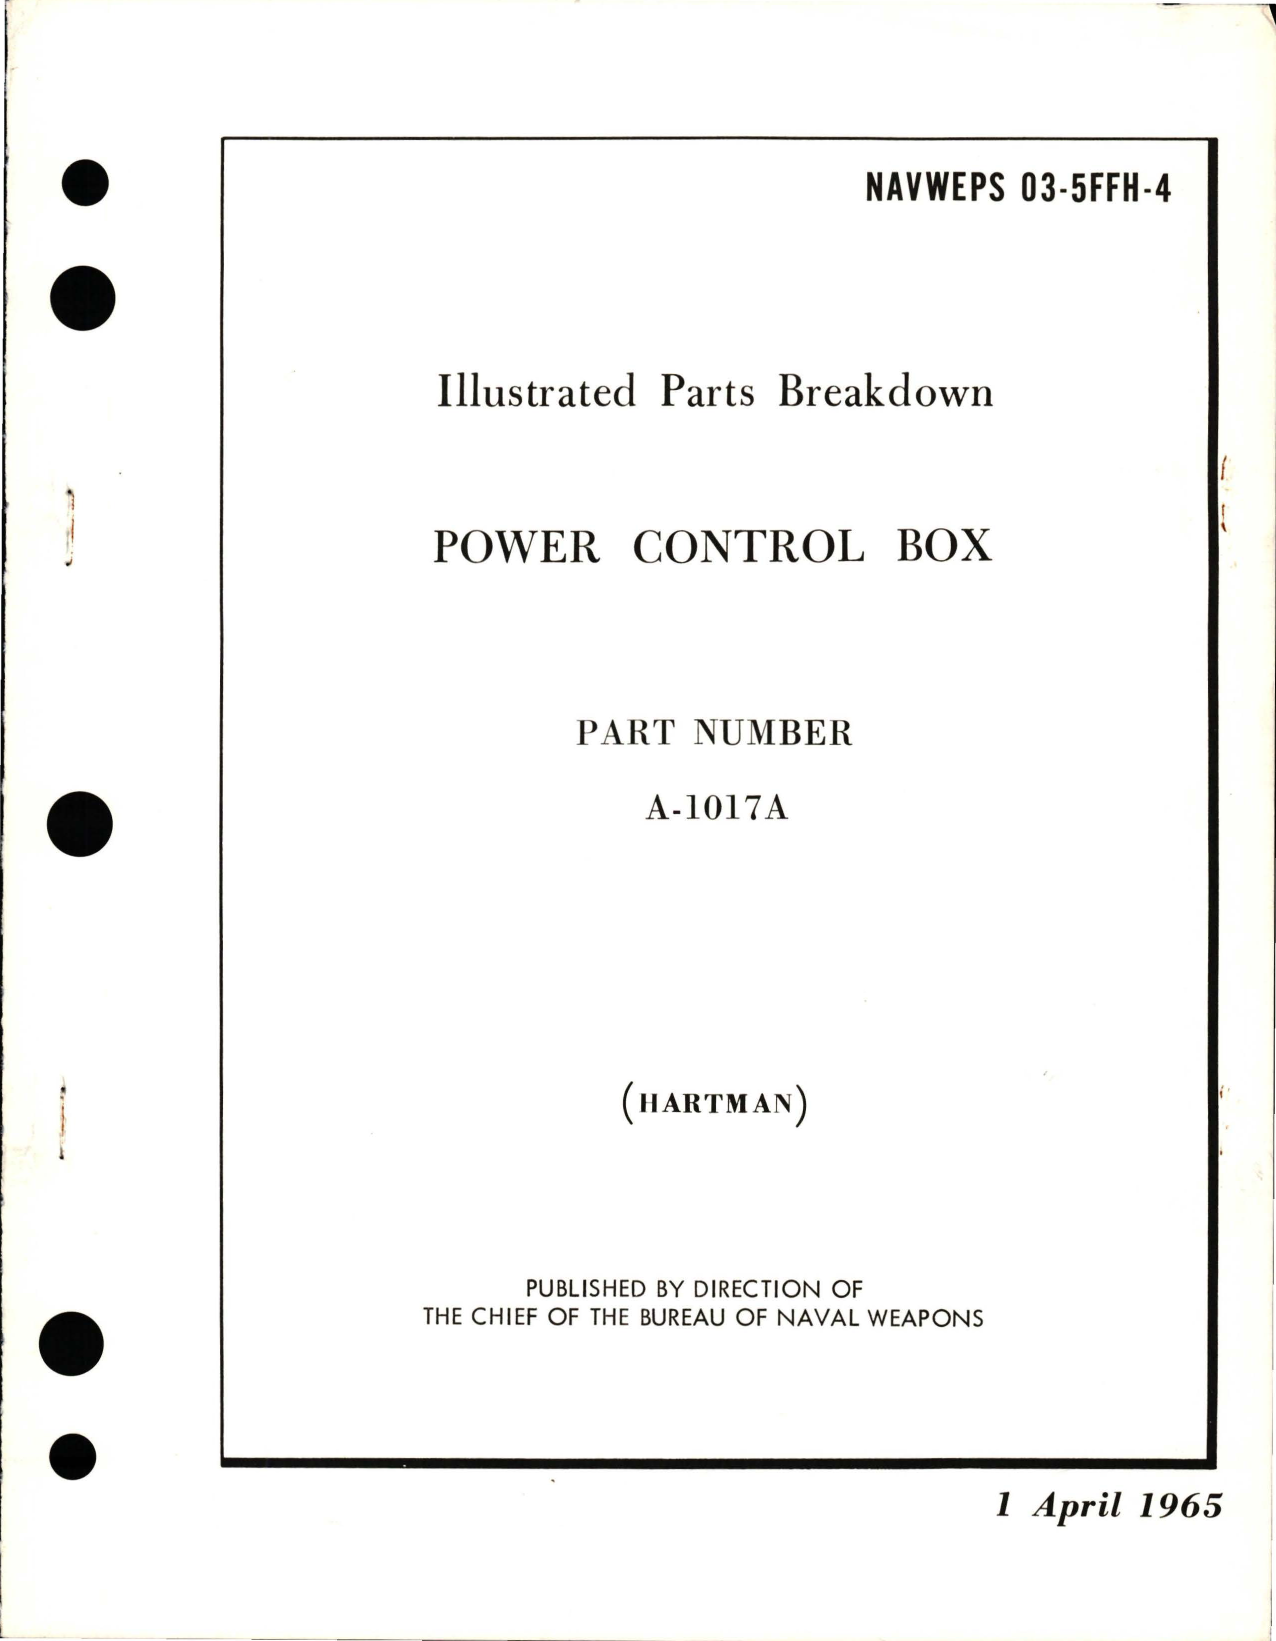 Sample page 1 from AirCorps Library document: Illustrated Parts Breakdown for Power Control Box - Part A-1017A